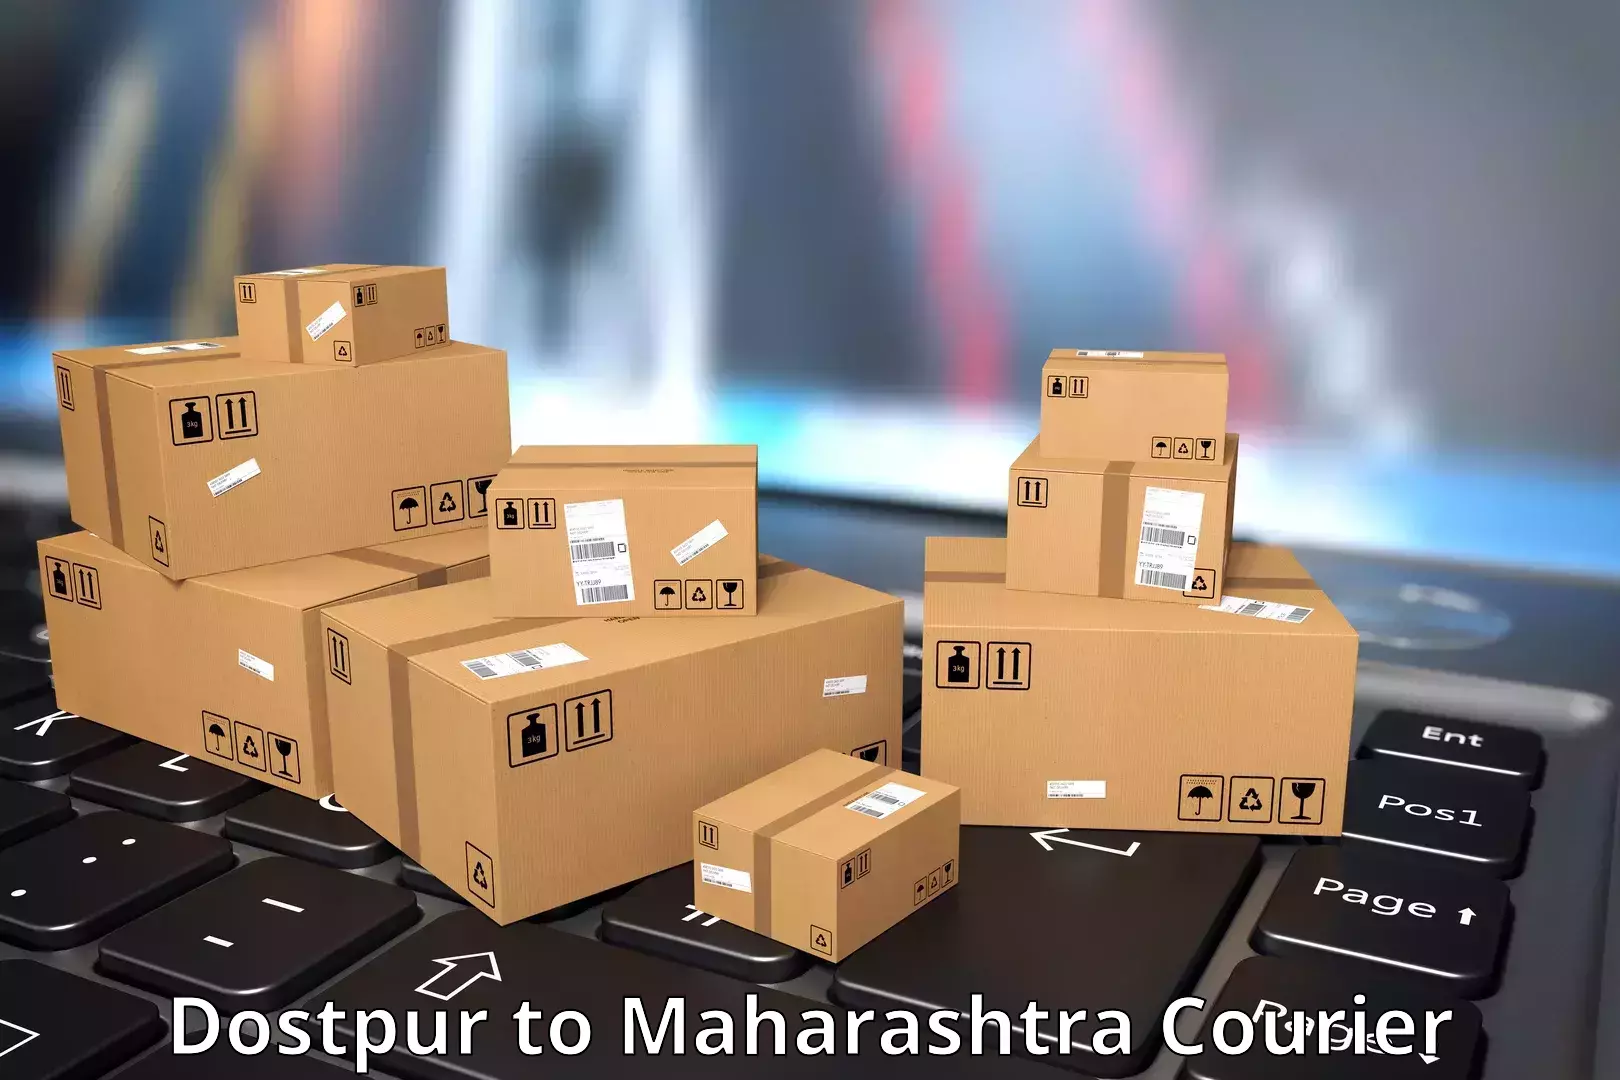 Courier service innovation Dostpur to Asangaon